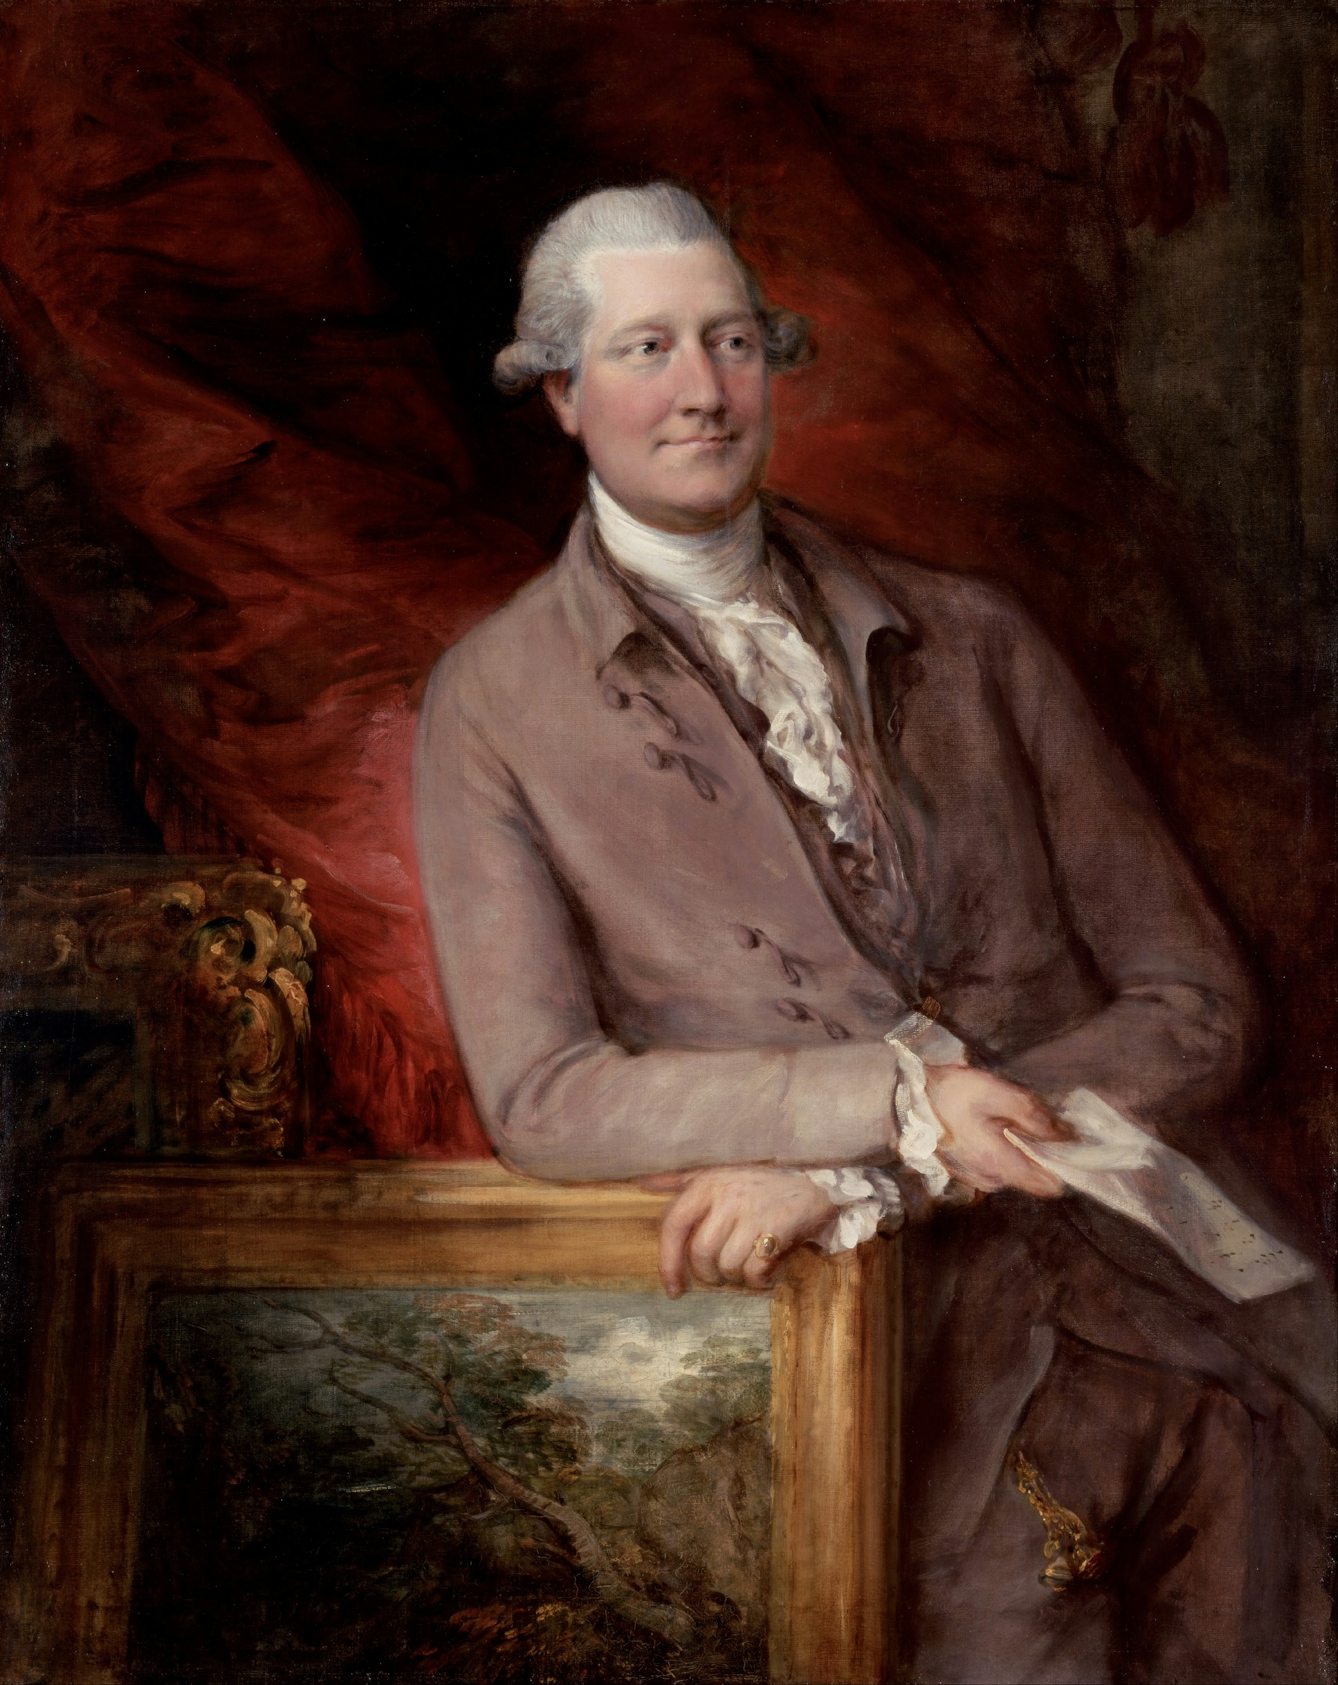 Painting of James Christie.  He is depicted leaning casually on a framed landscape painting.